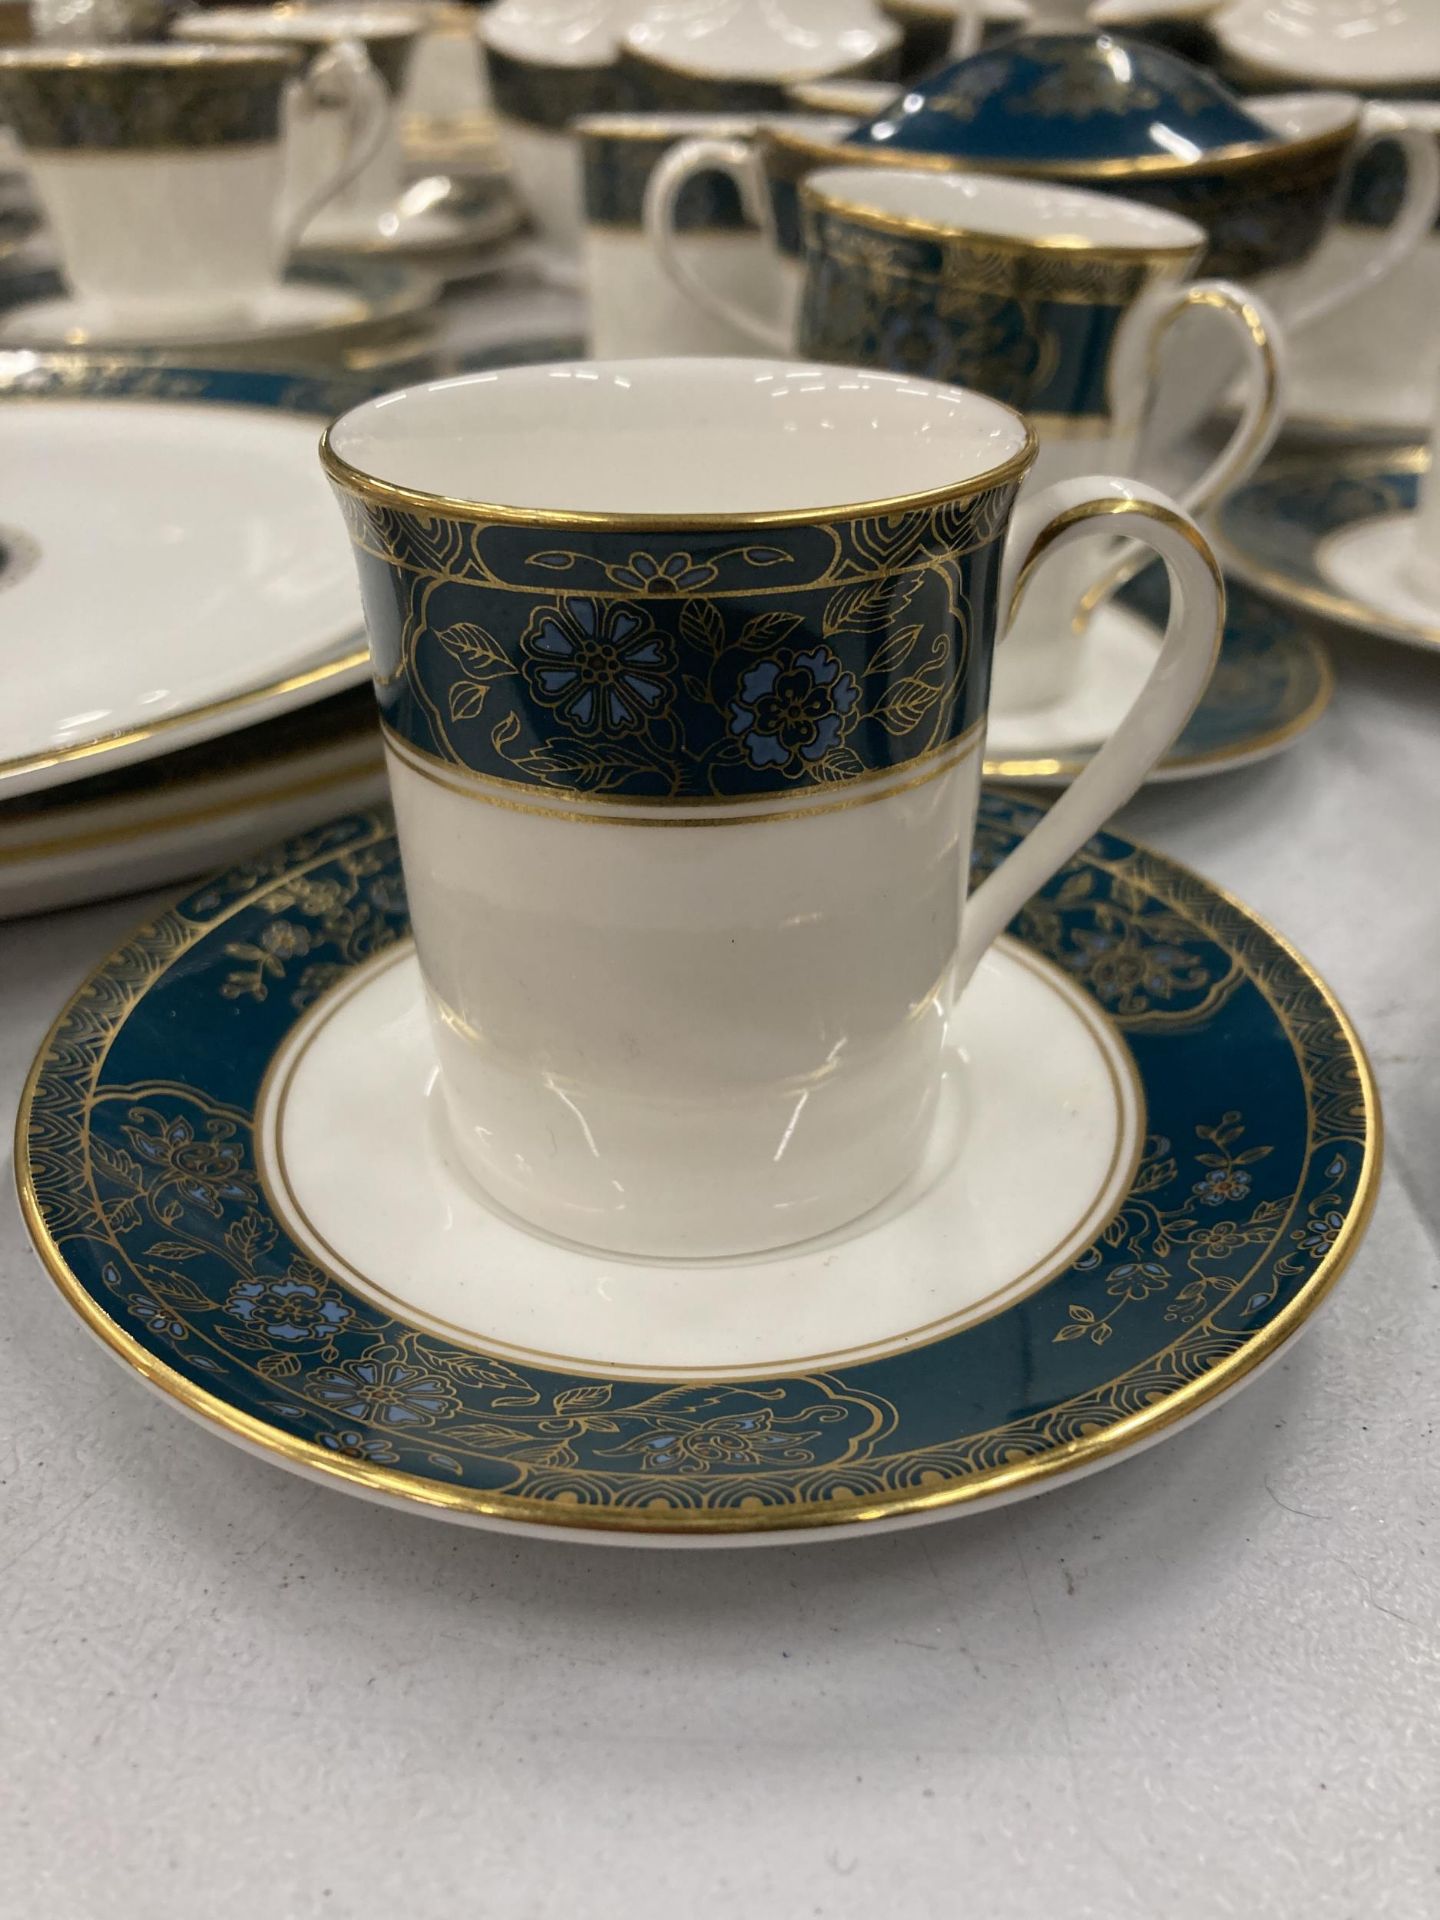 A LARGE ROYAL DOULTON 'CARLYLE' PATTERN TEA SERVICE - Image 2 of 7